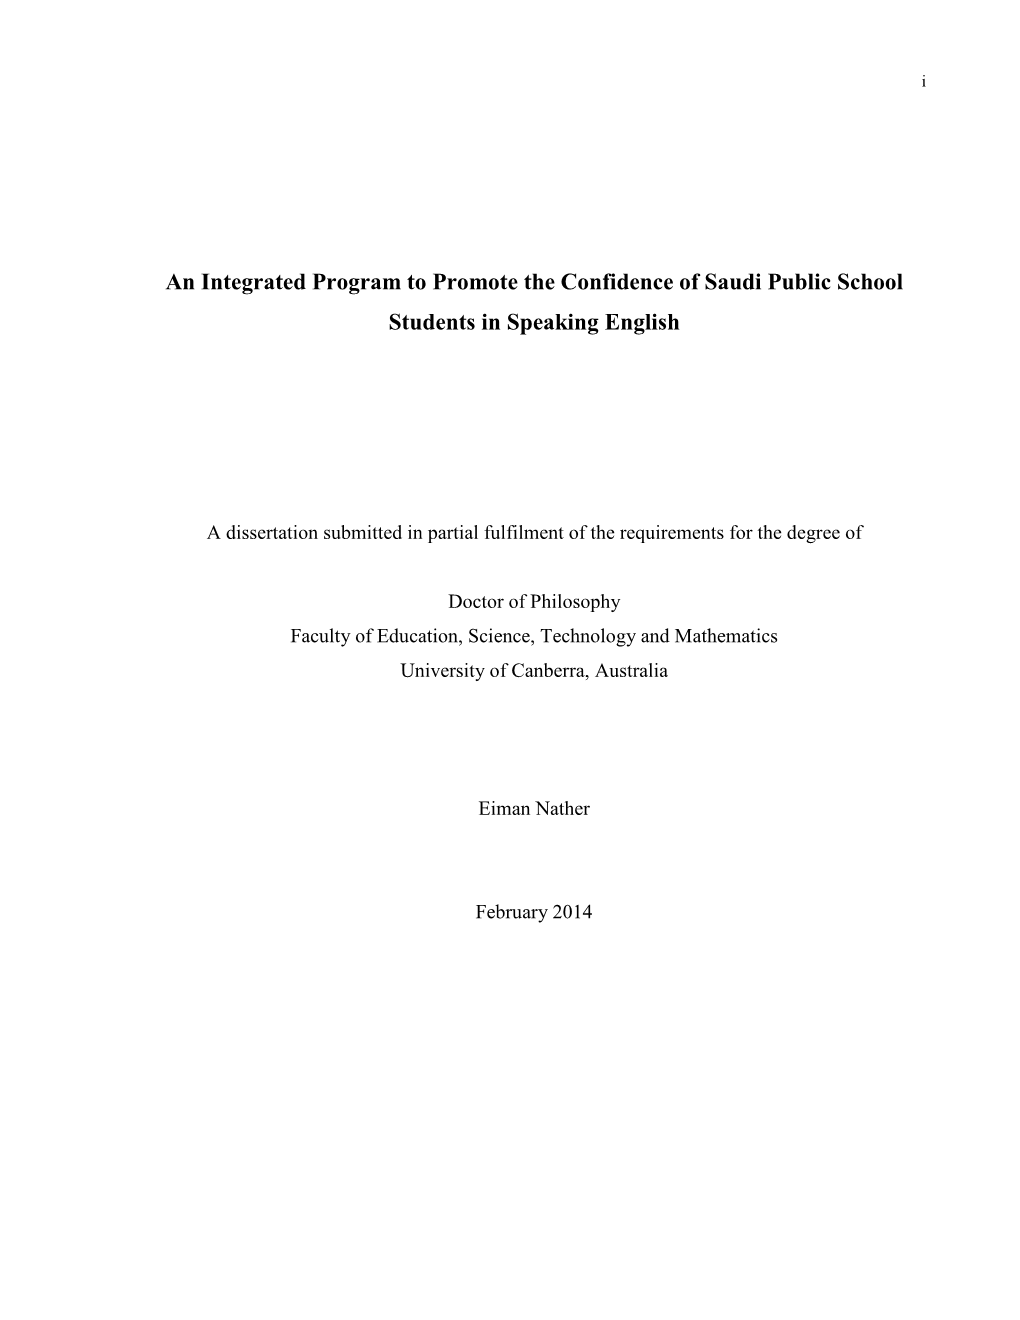 An Integrated Program to Promote the Confidence of Saudi Public School Students in Speaking English